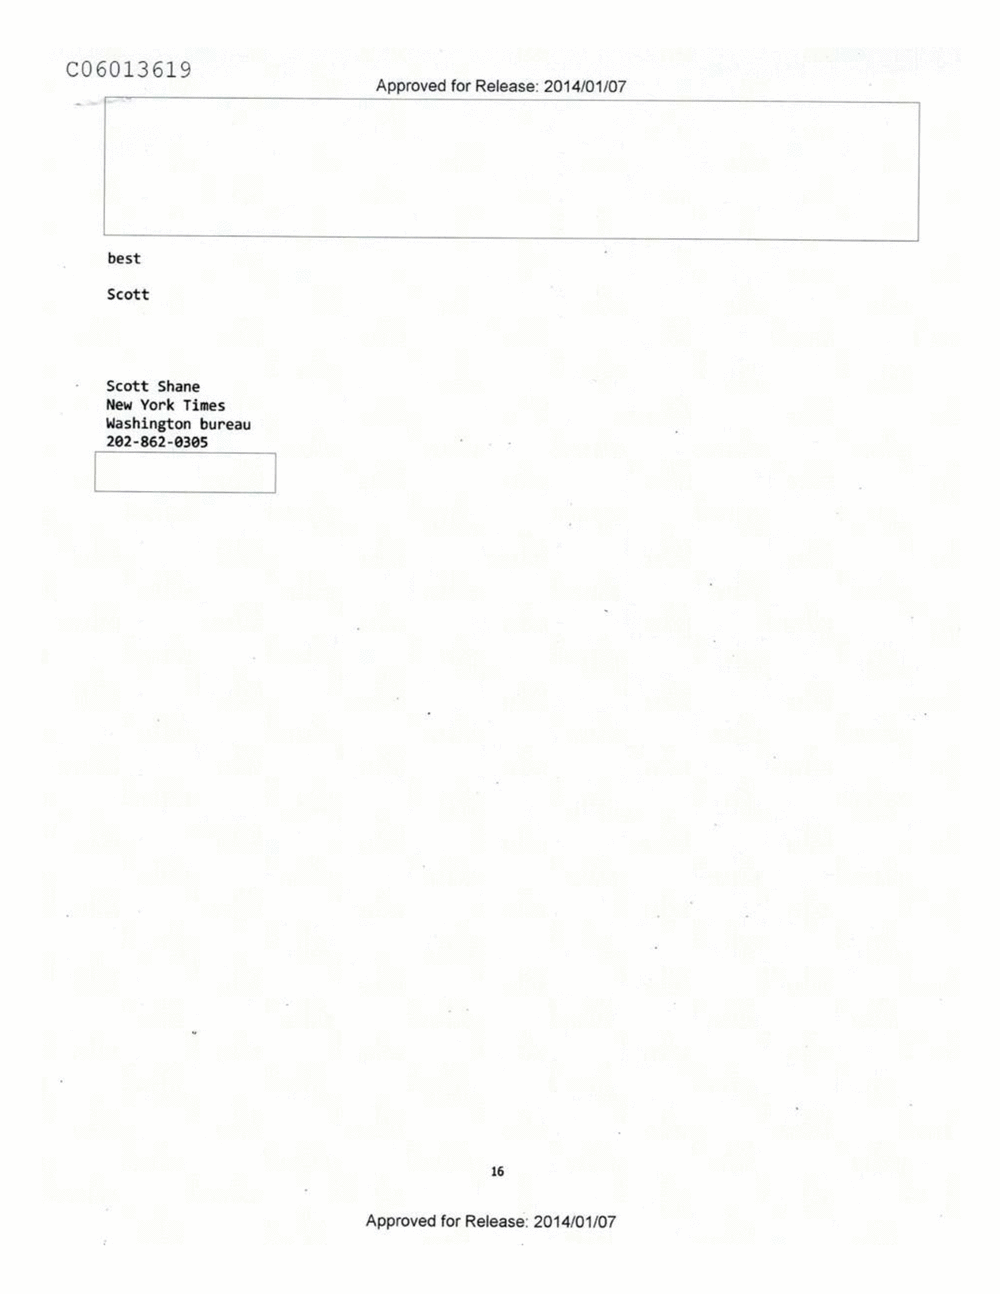 Page 452 from Email Correspondence Between Reporters and CIA Flacks